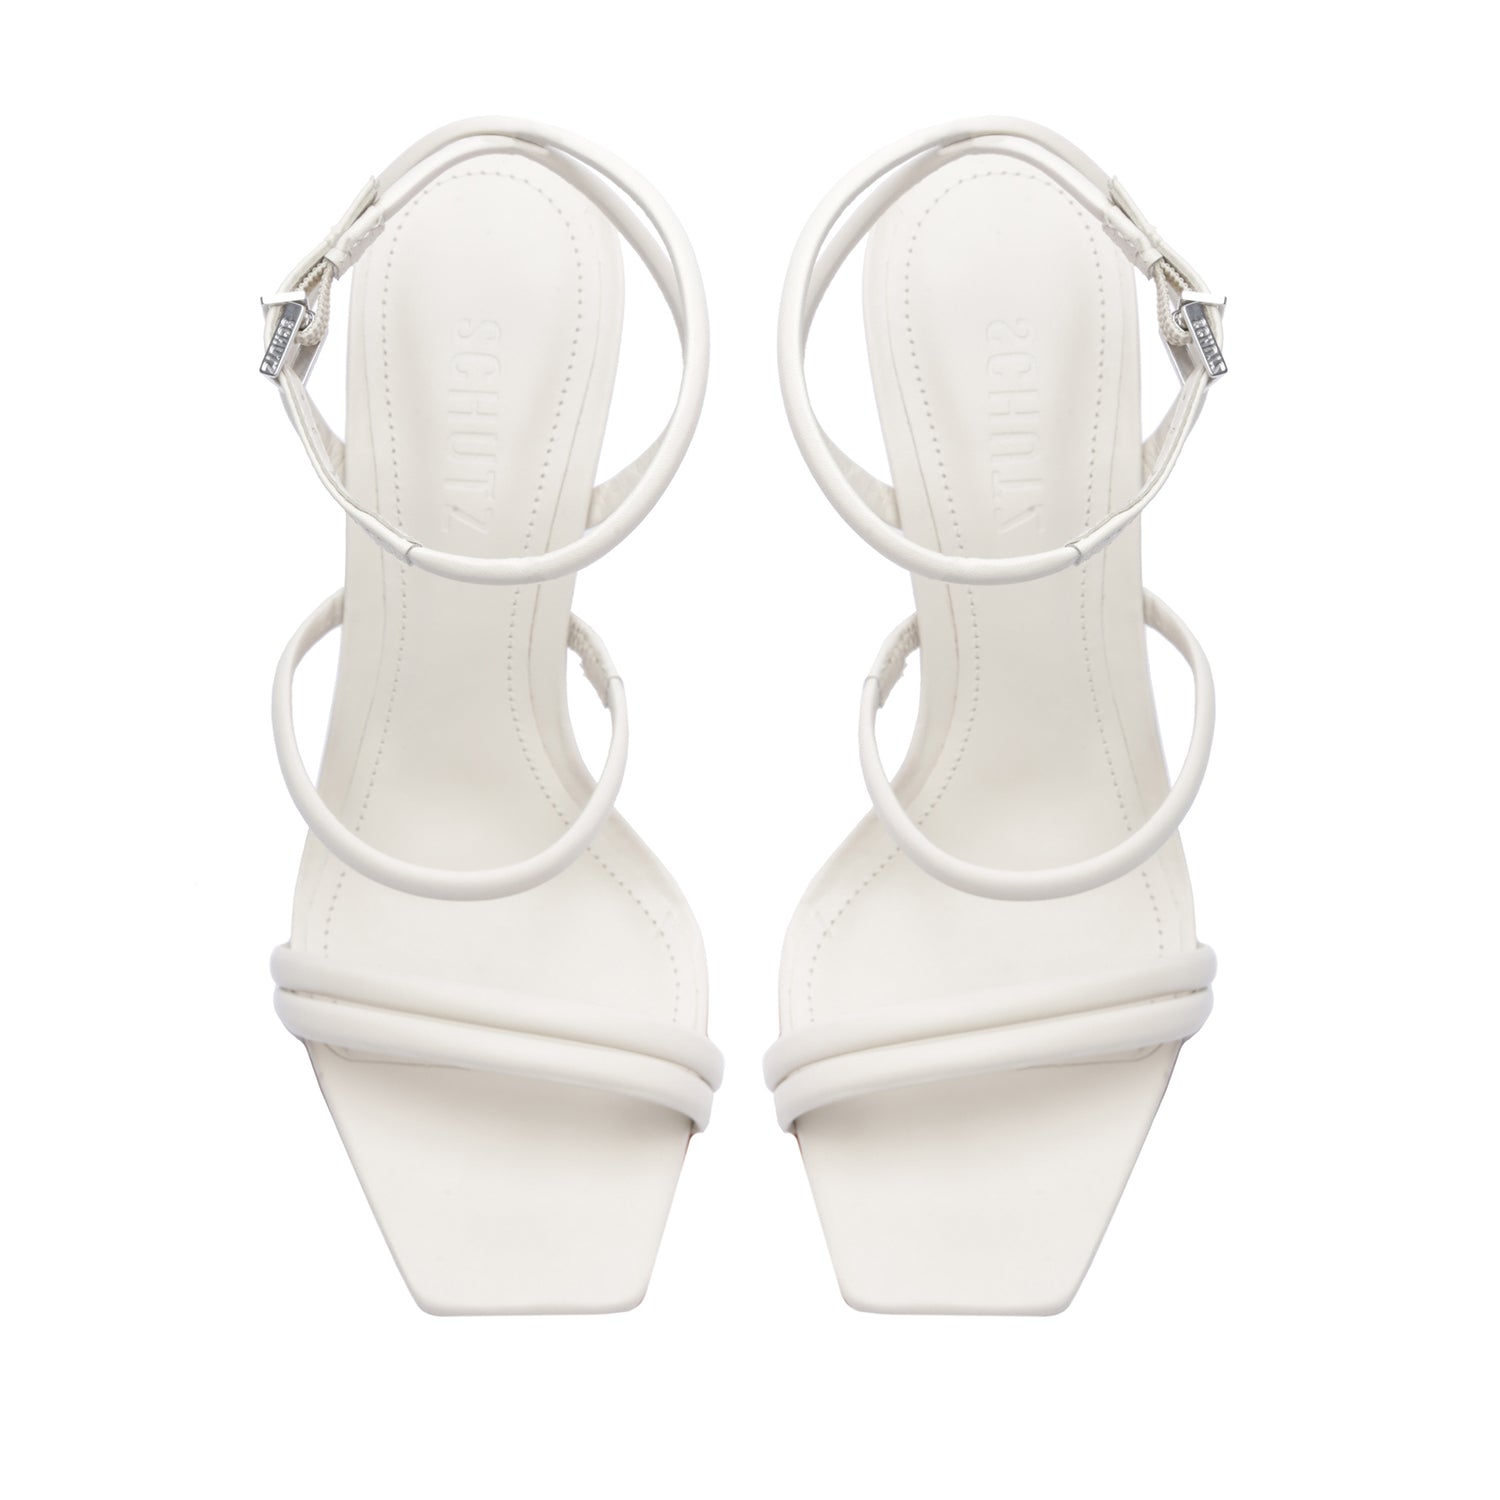 Nylla Casual Nappa Leather Sandal Sandals Pre Fall 23    - Schutz Shoes